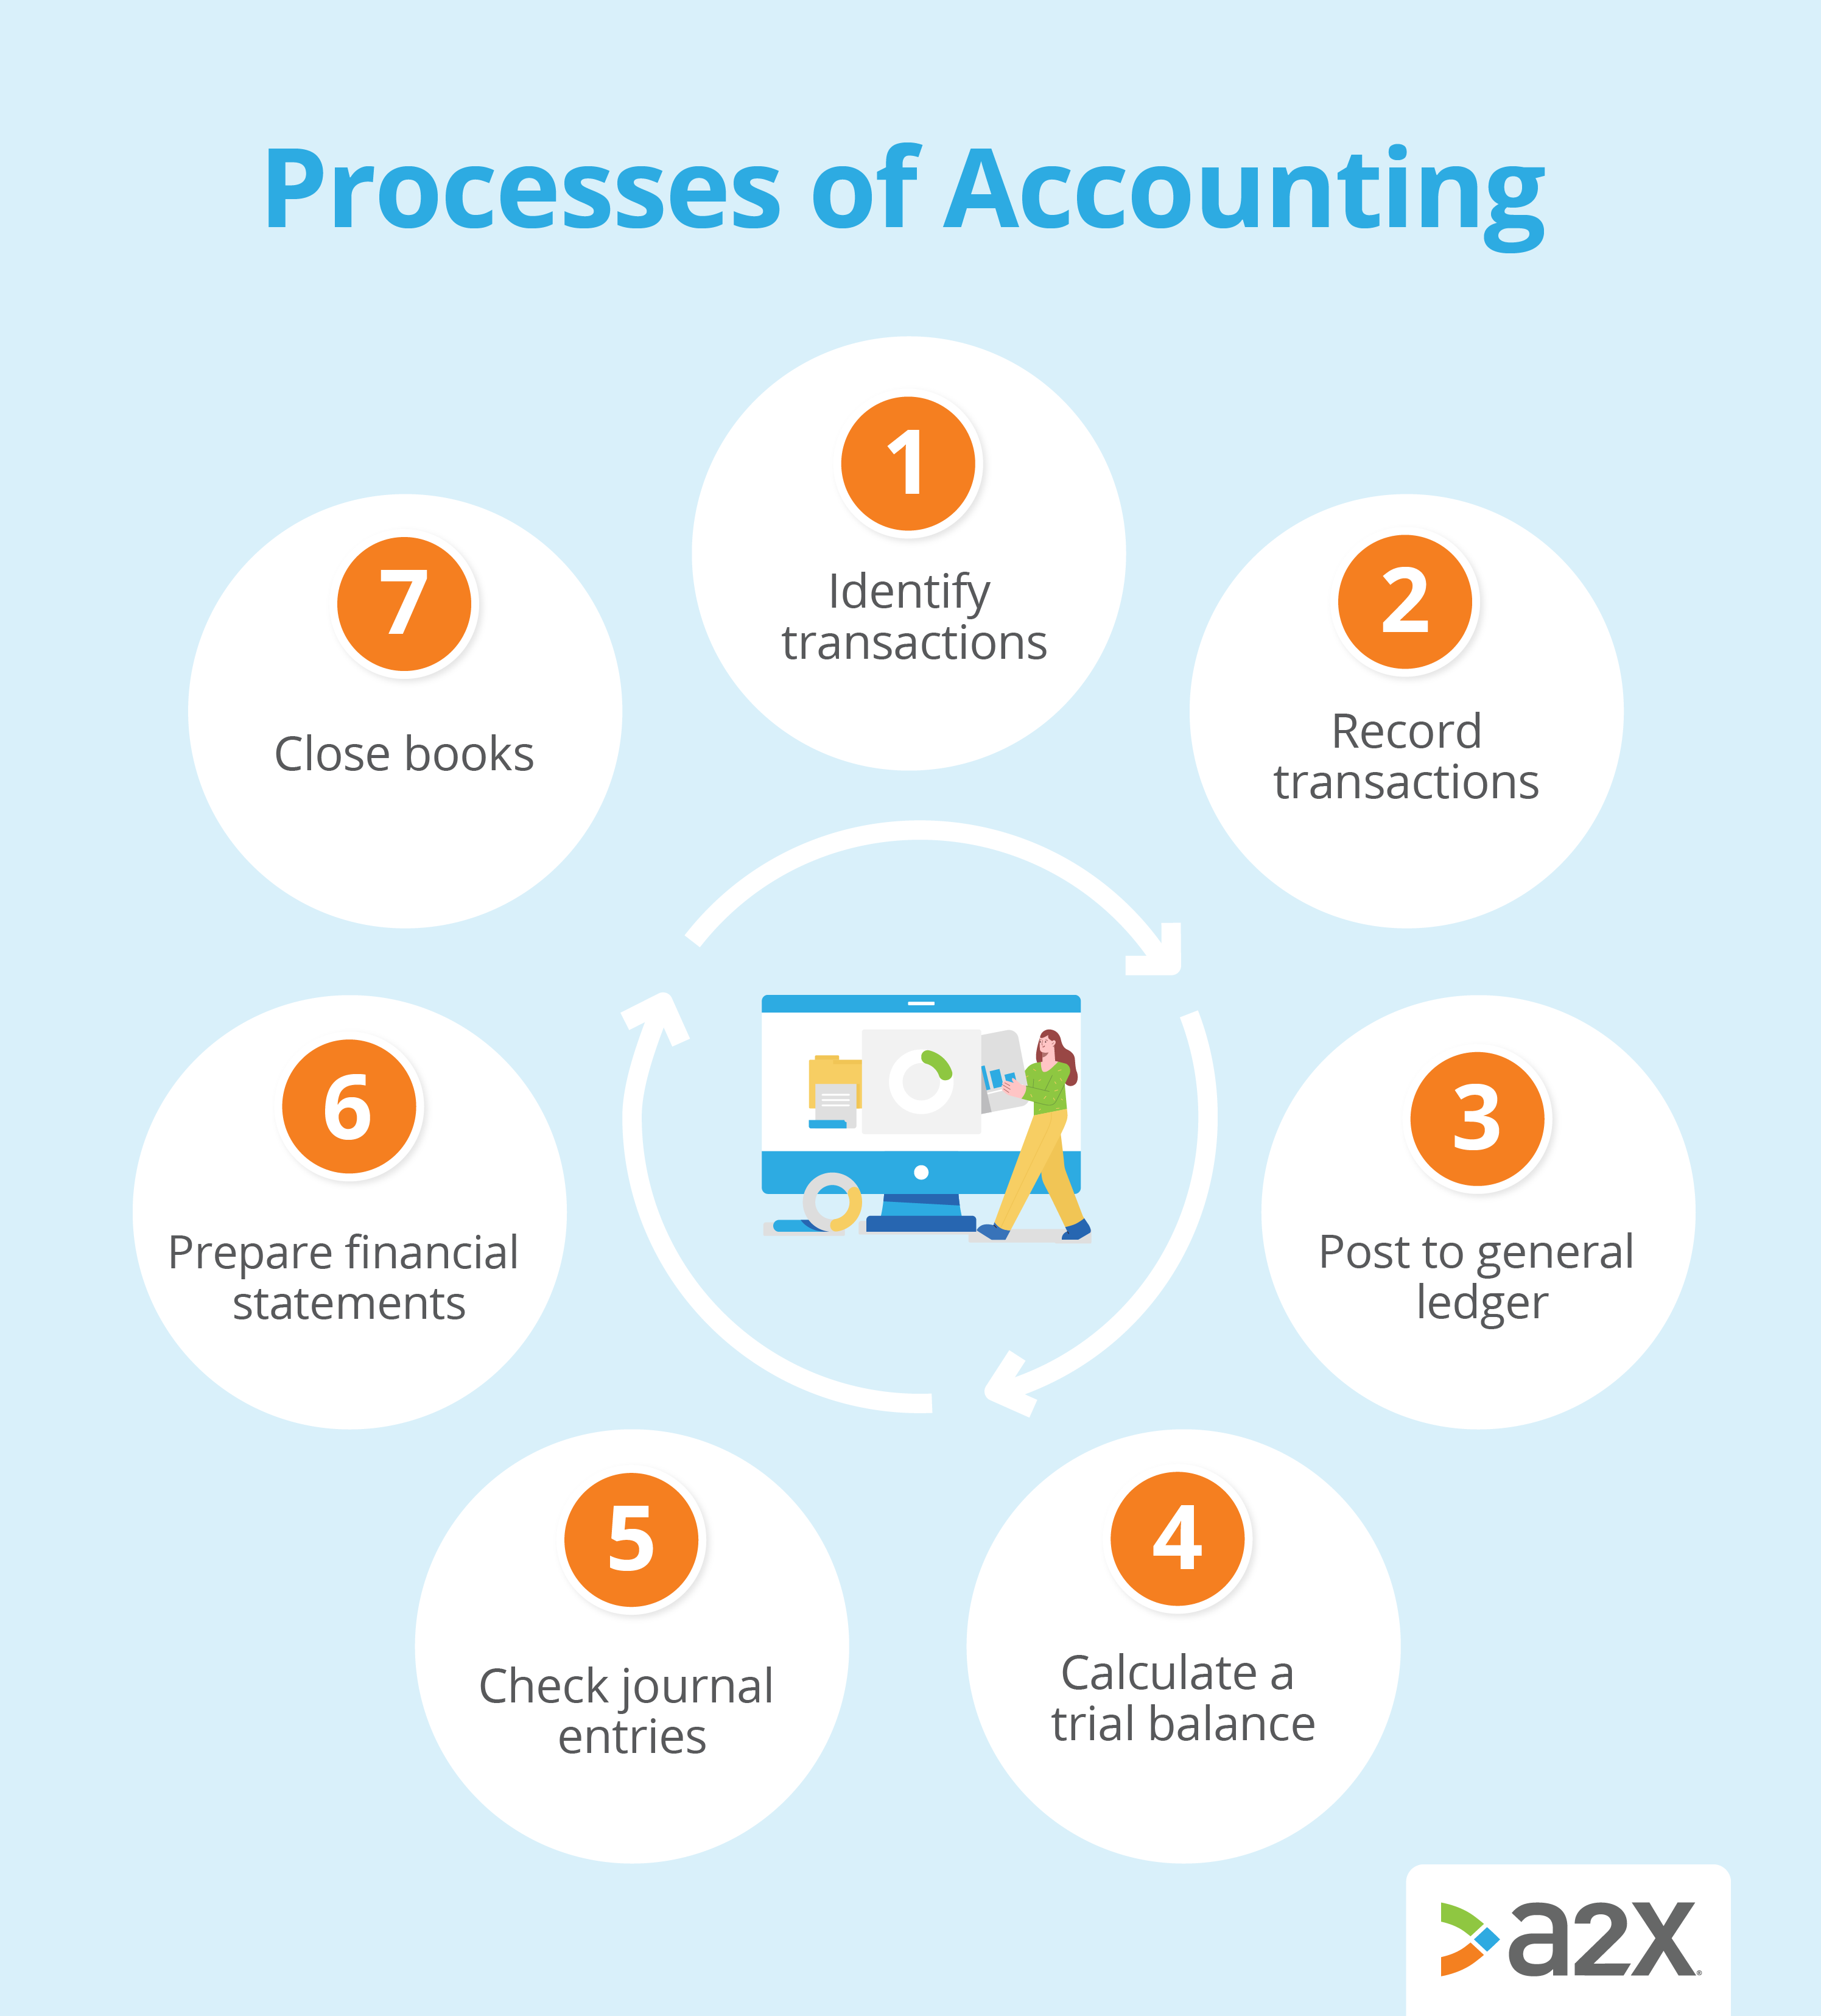 graphic should the processes of accounting including: identify transactions, record transactions, post to general ledger, calculate a trial balance, check journal entries, prepare financial statements, and close books